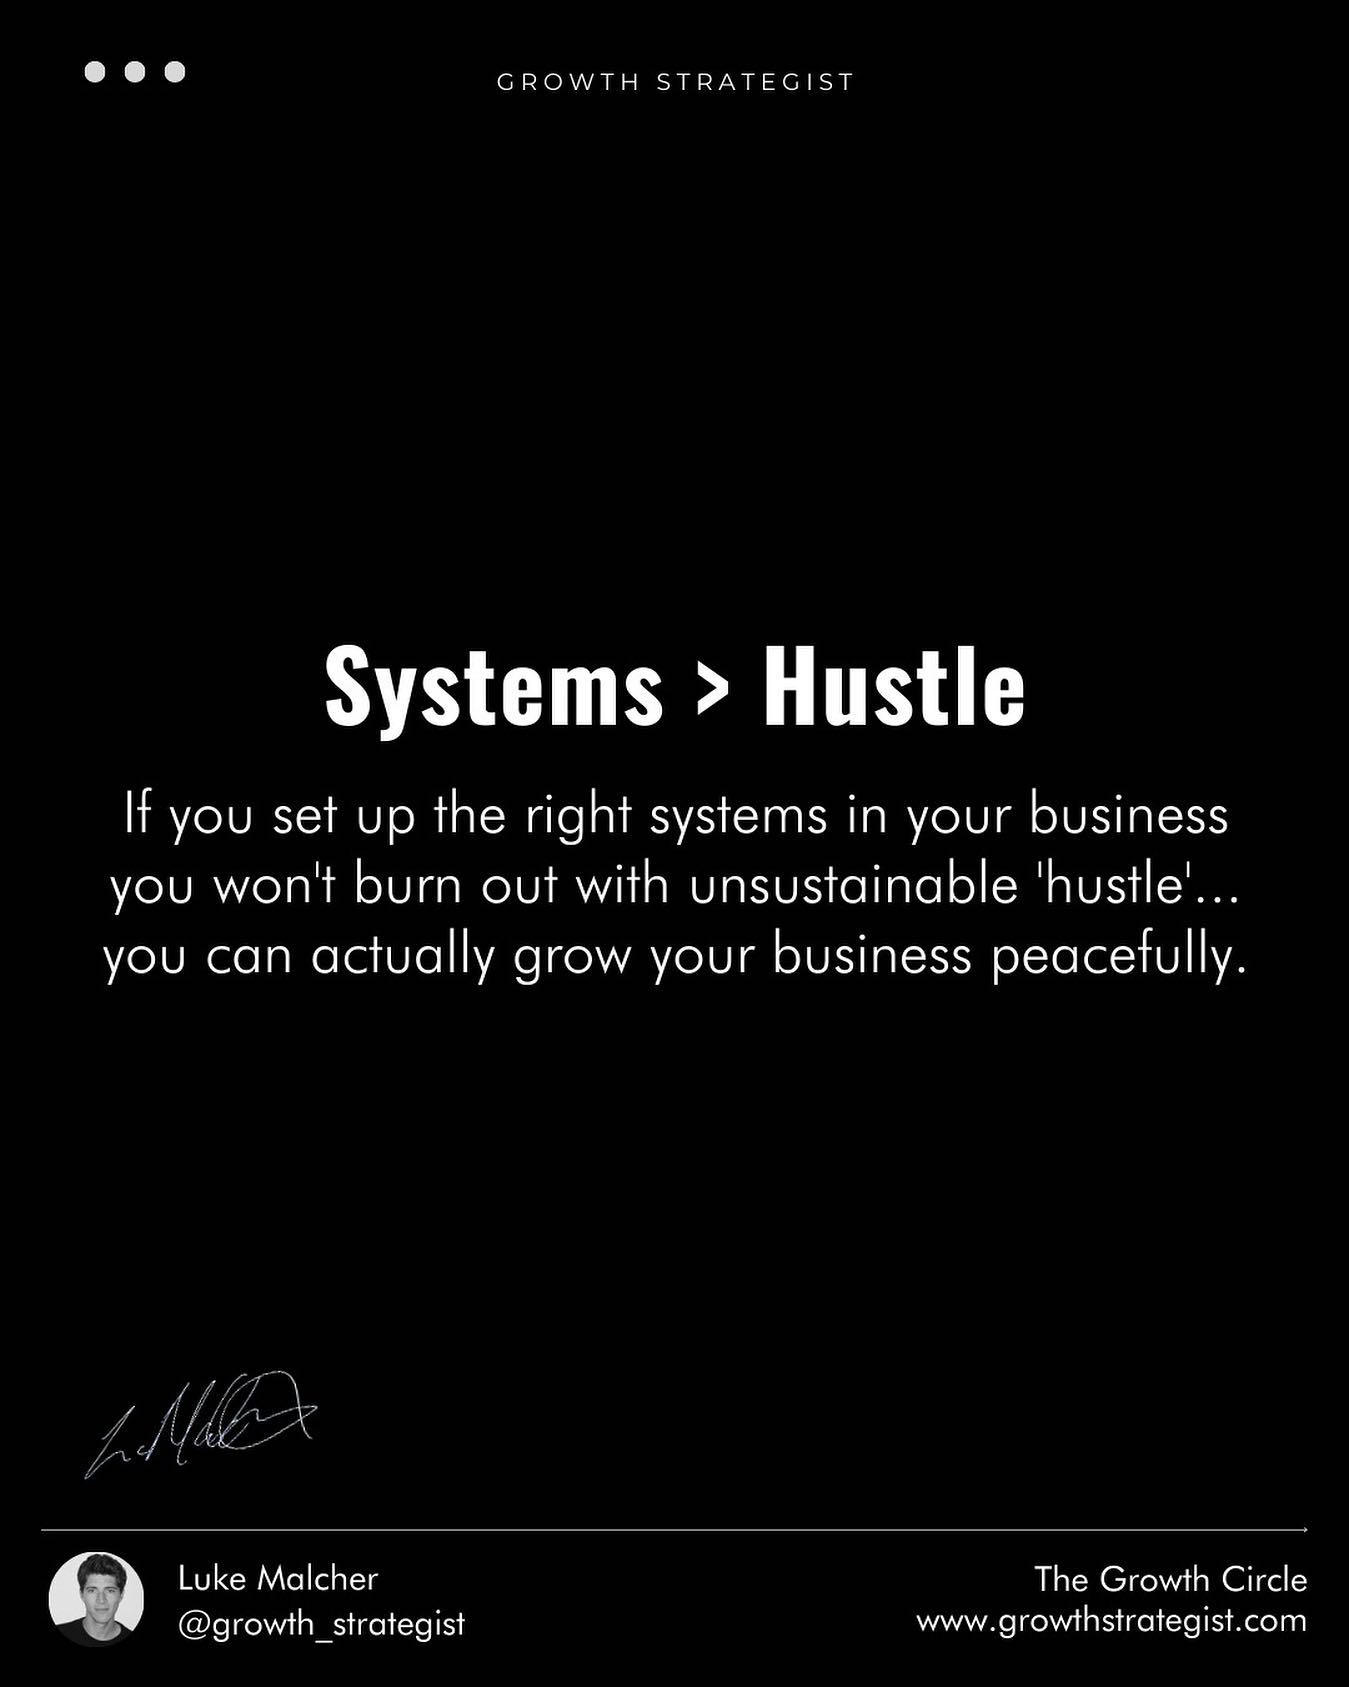 Hustle in the short game to set your systems up for the long game